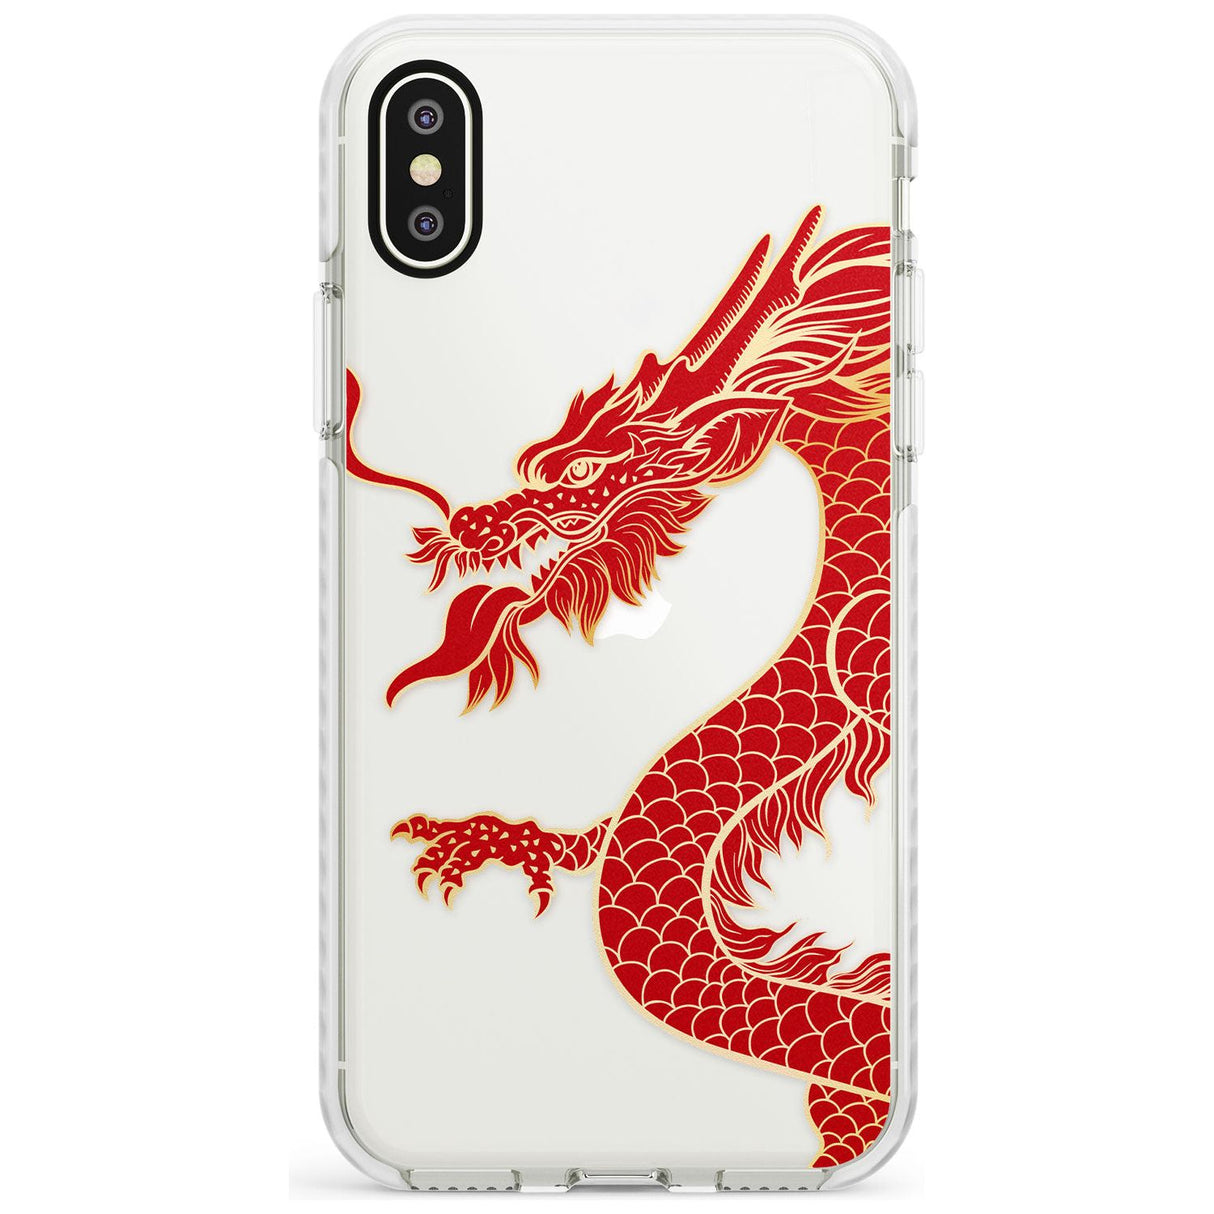 Large Black Dragon Impact Phone Case for iPhone X XS Max XR